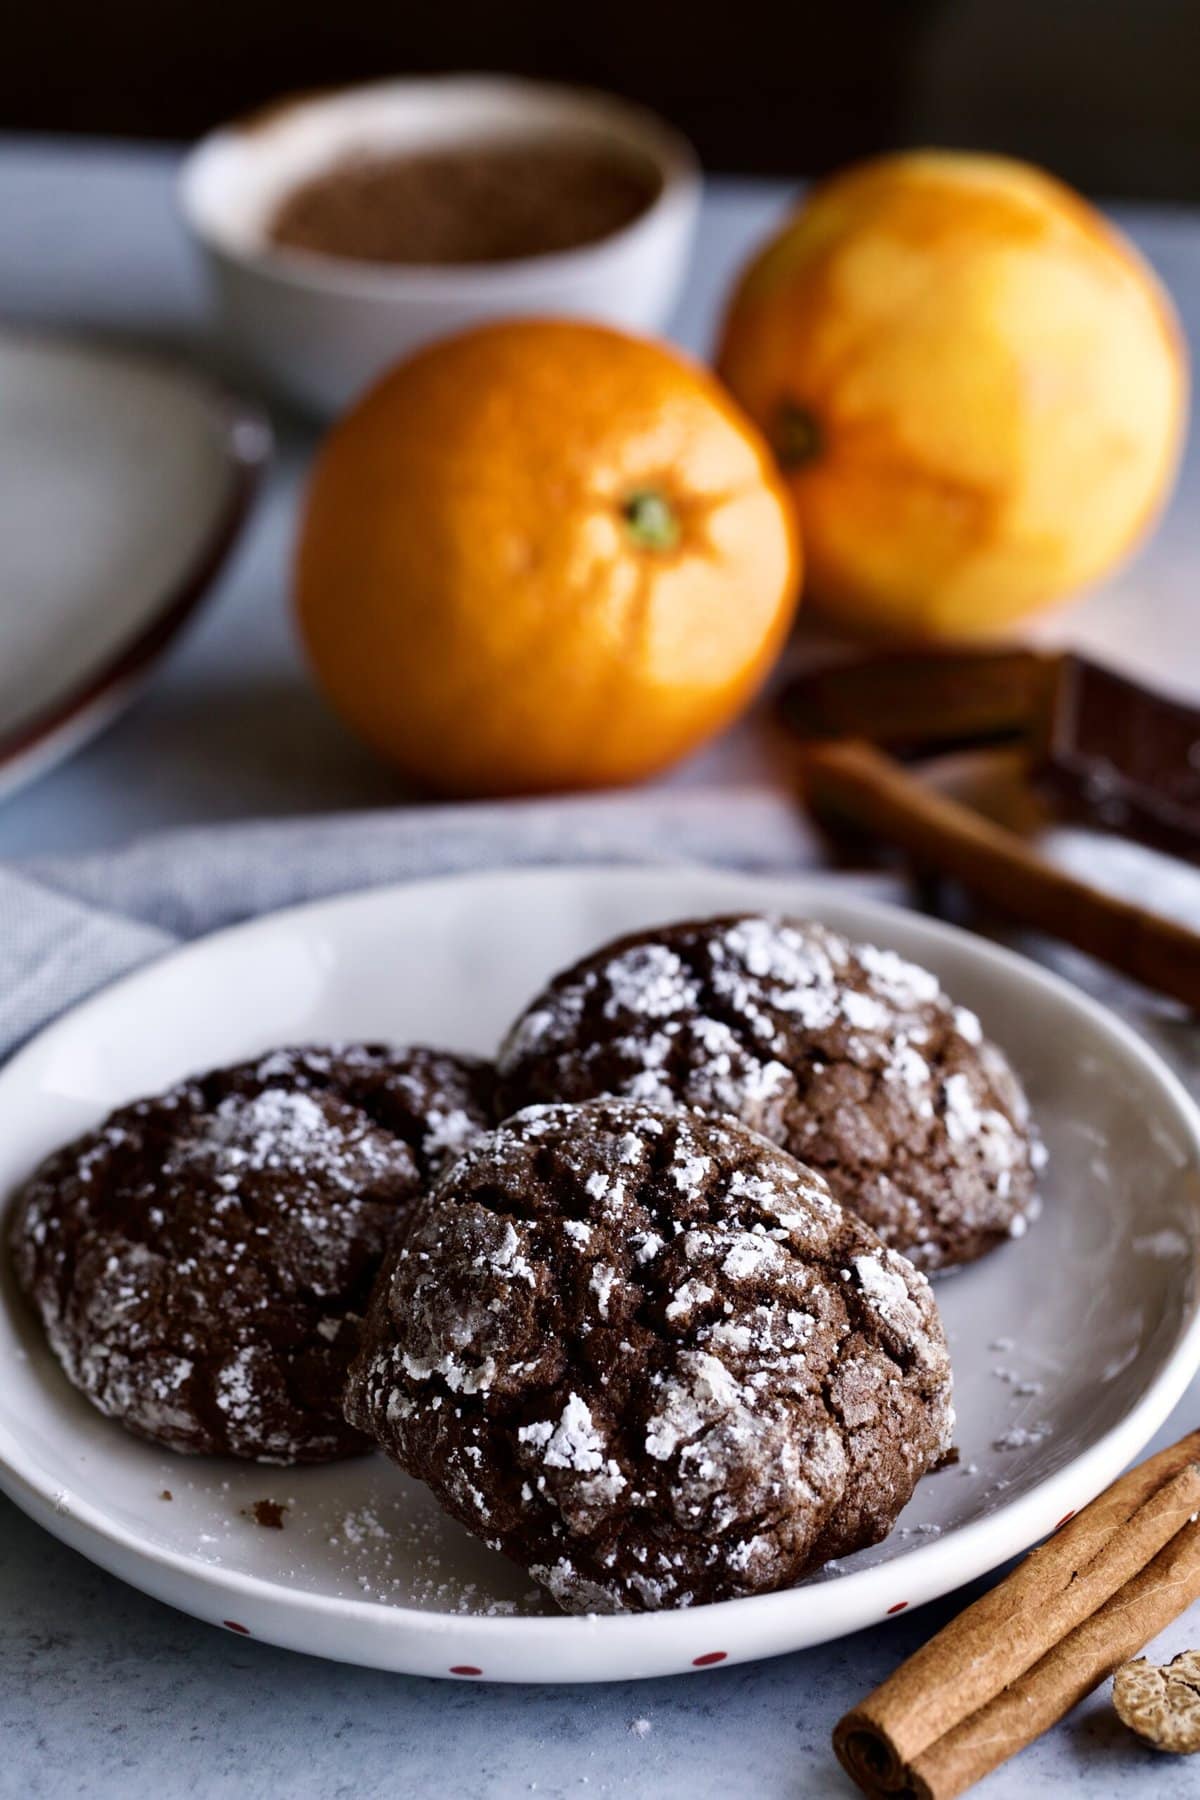 chocolate spice cookies on a plate with pieces of chocolate, orange and spices, in the background.